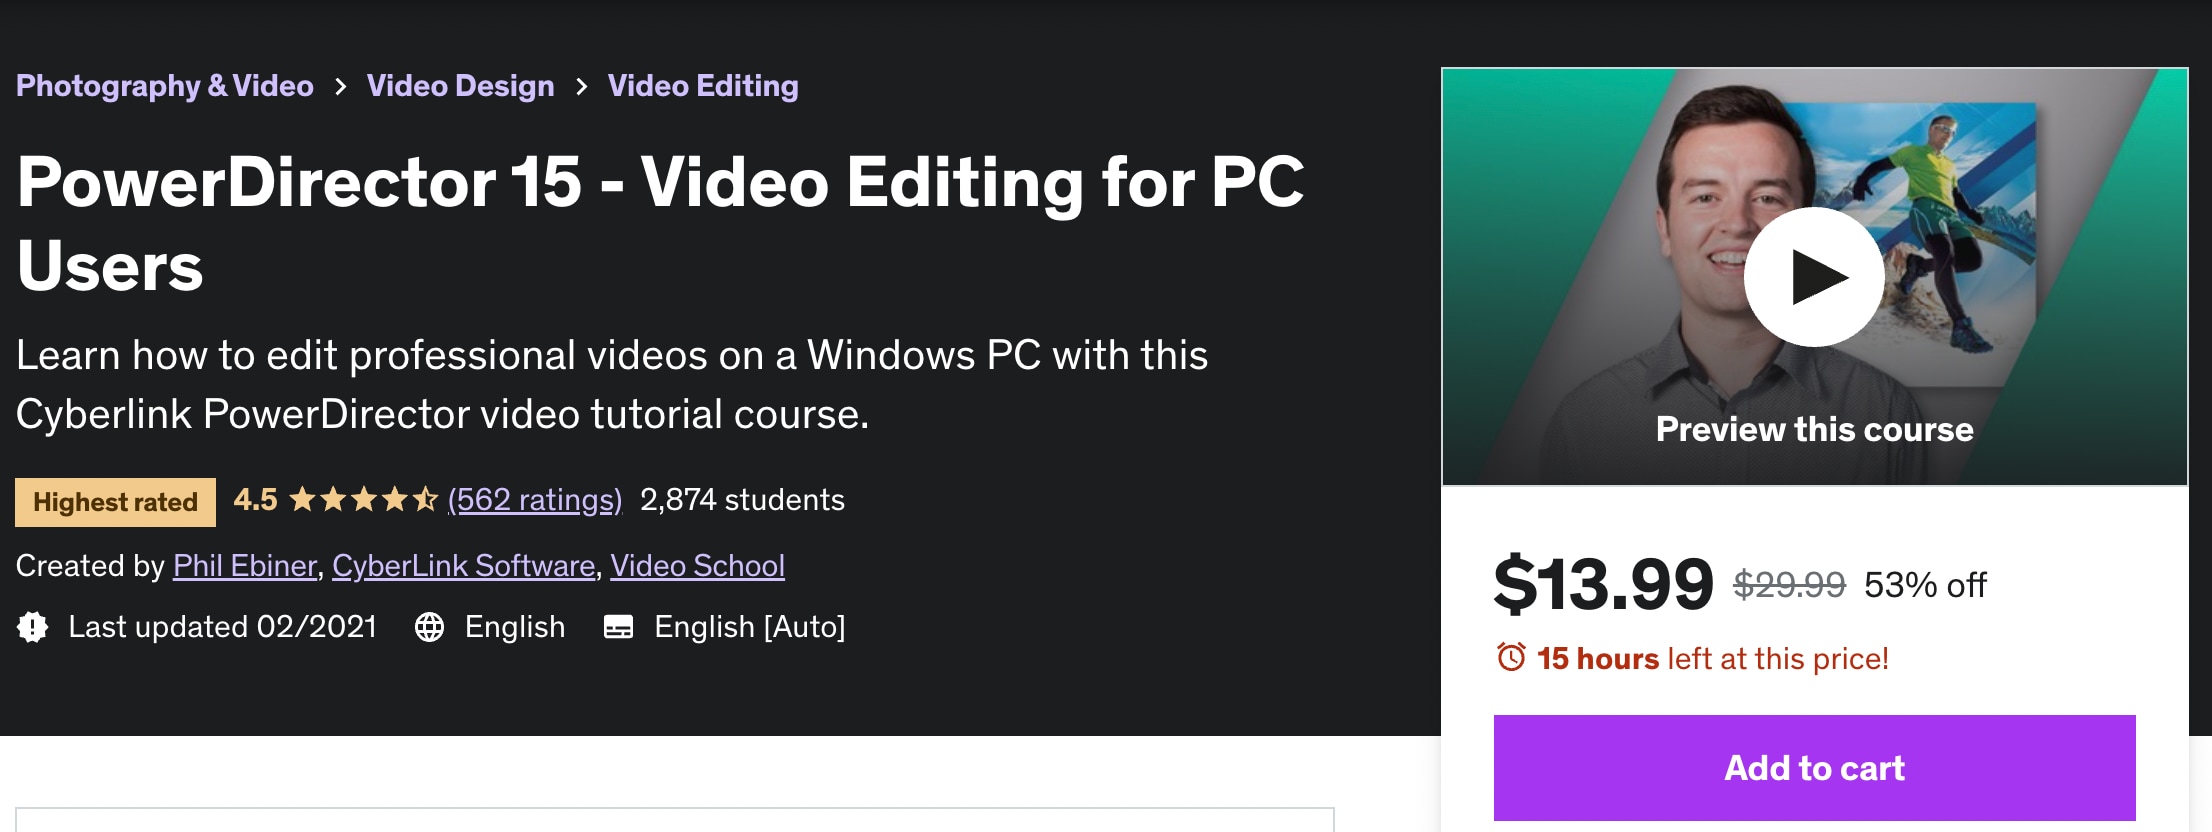 powerdirector video editing course online with certification